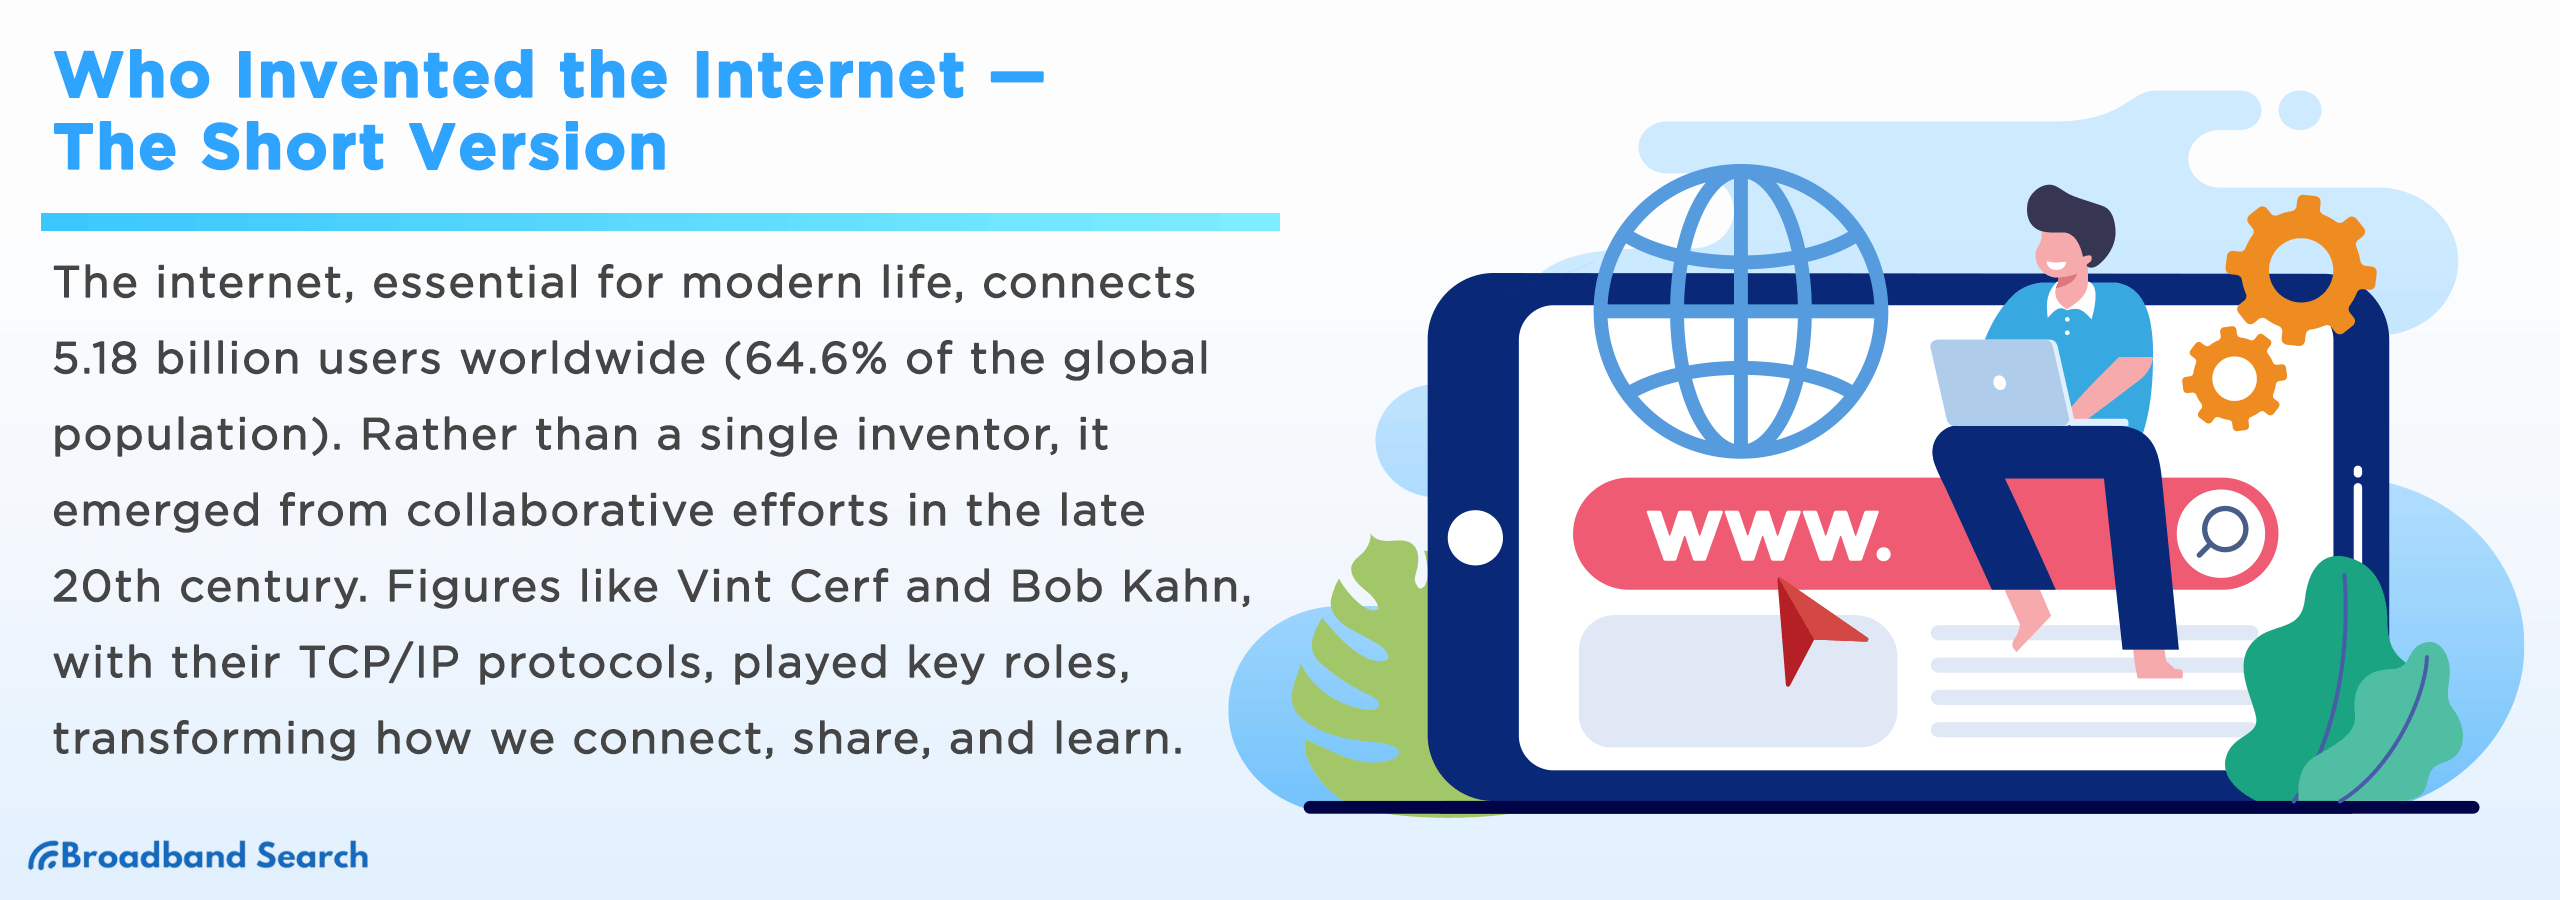 Who Invented the Internet - A Full History